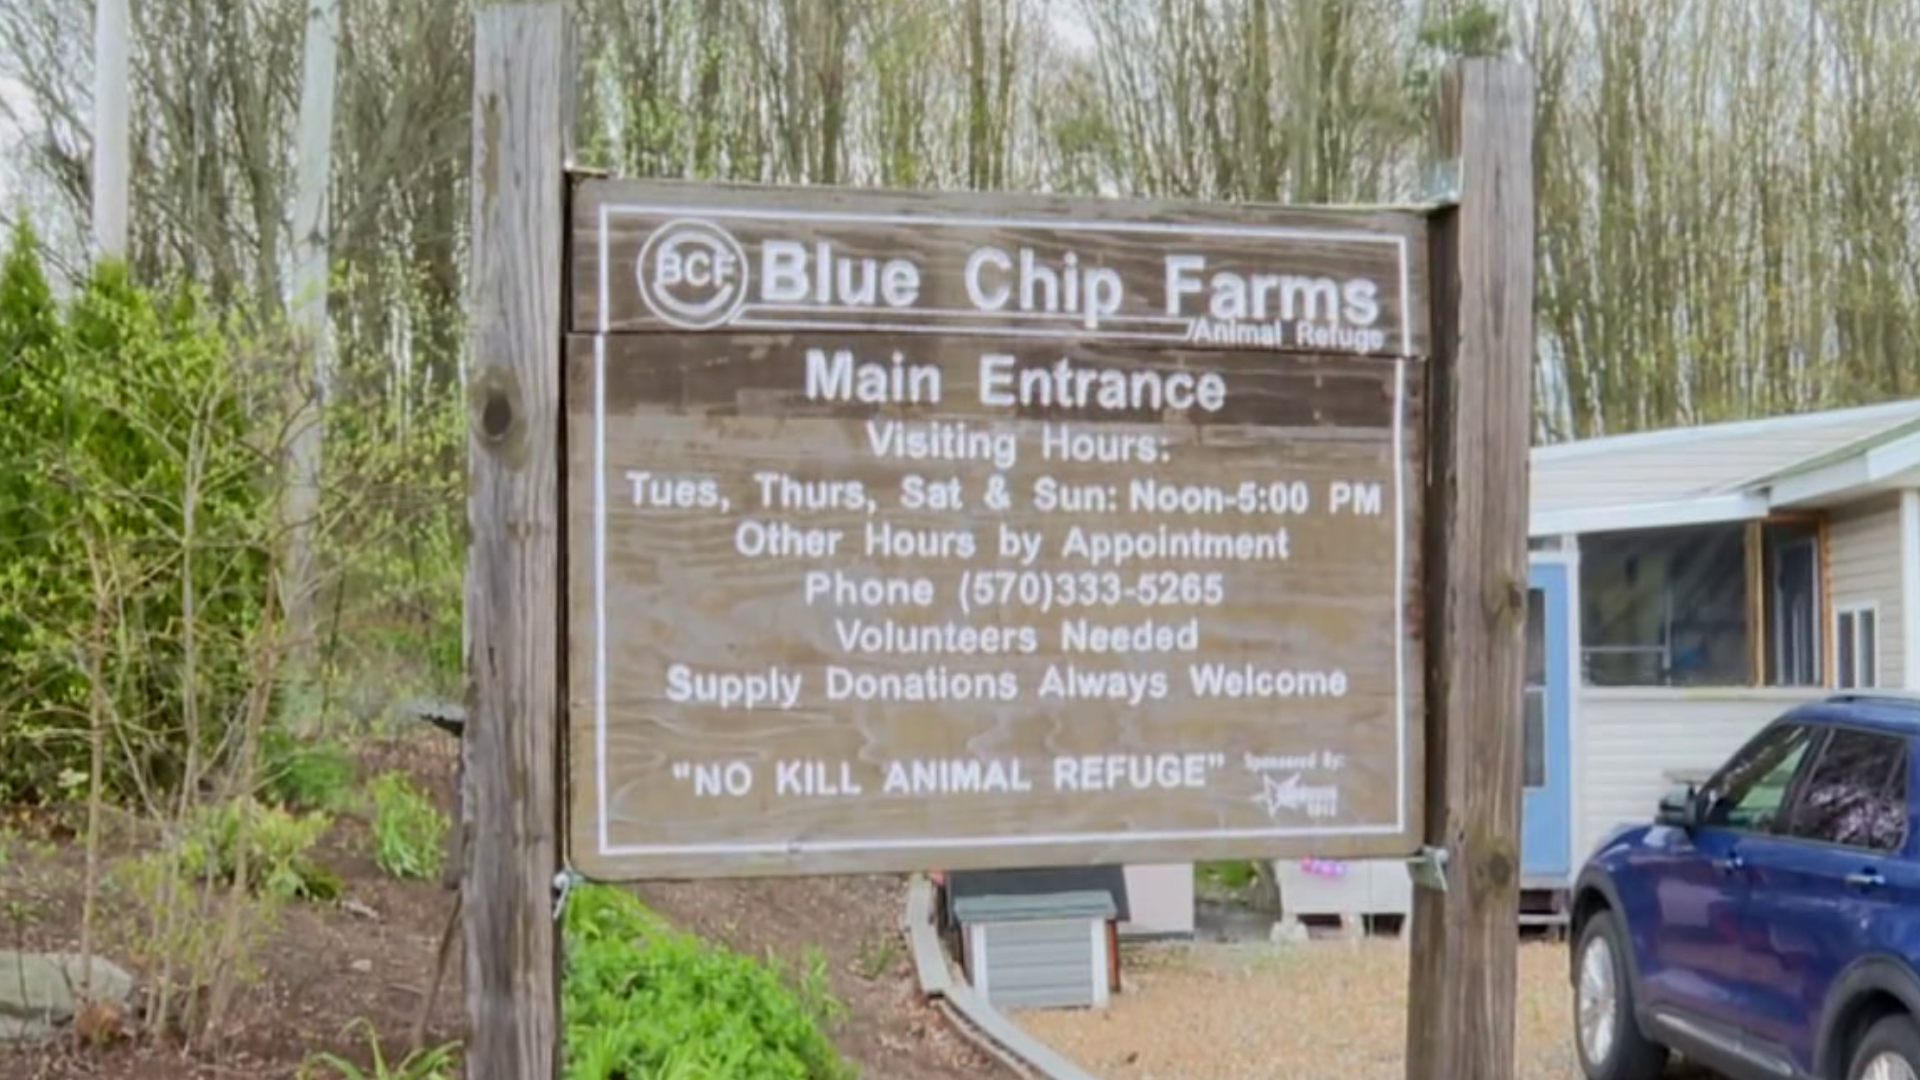 Blue Chip Farm Animal Refuge in Luzerne County is temporarily closed after a virus outbreak.